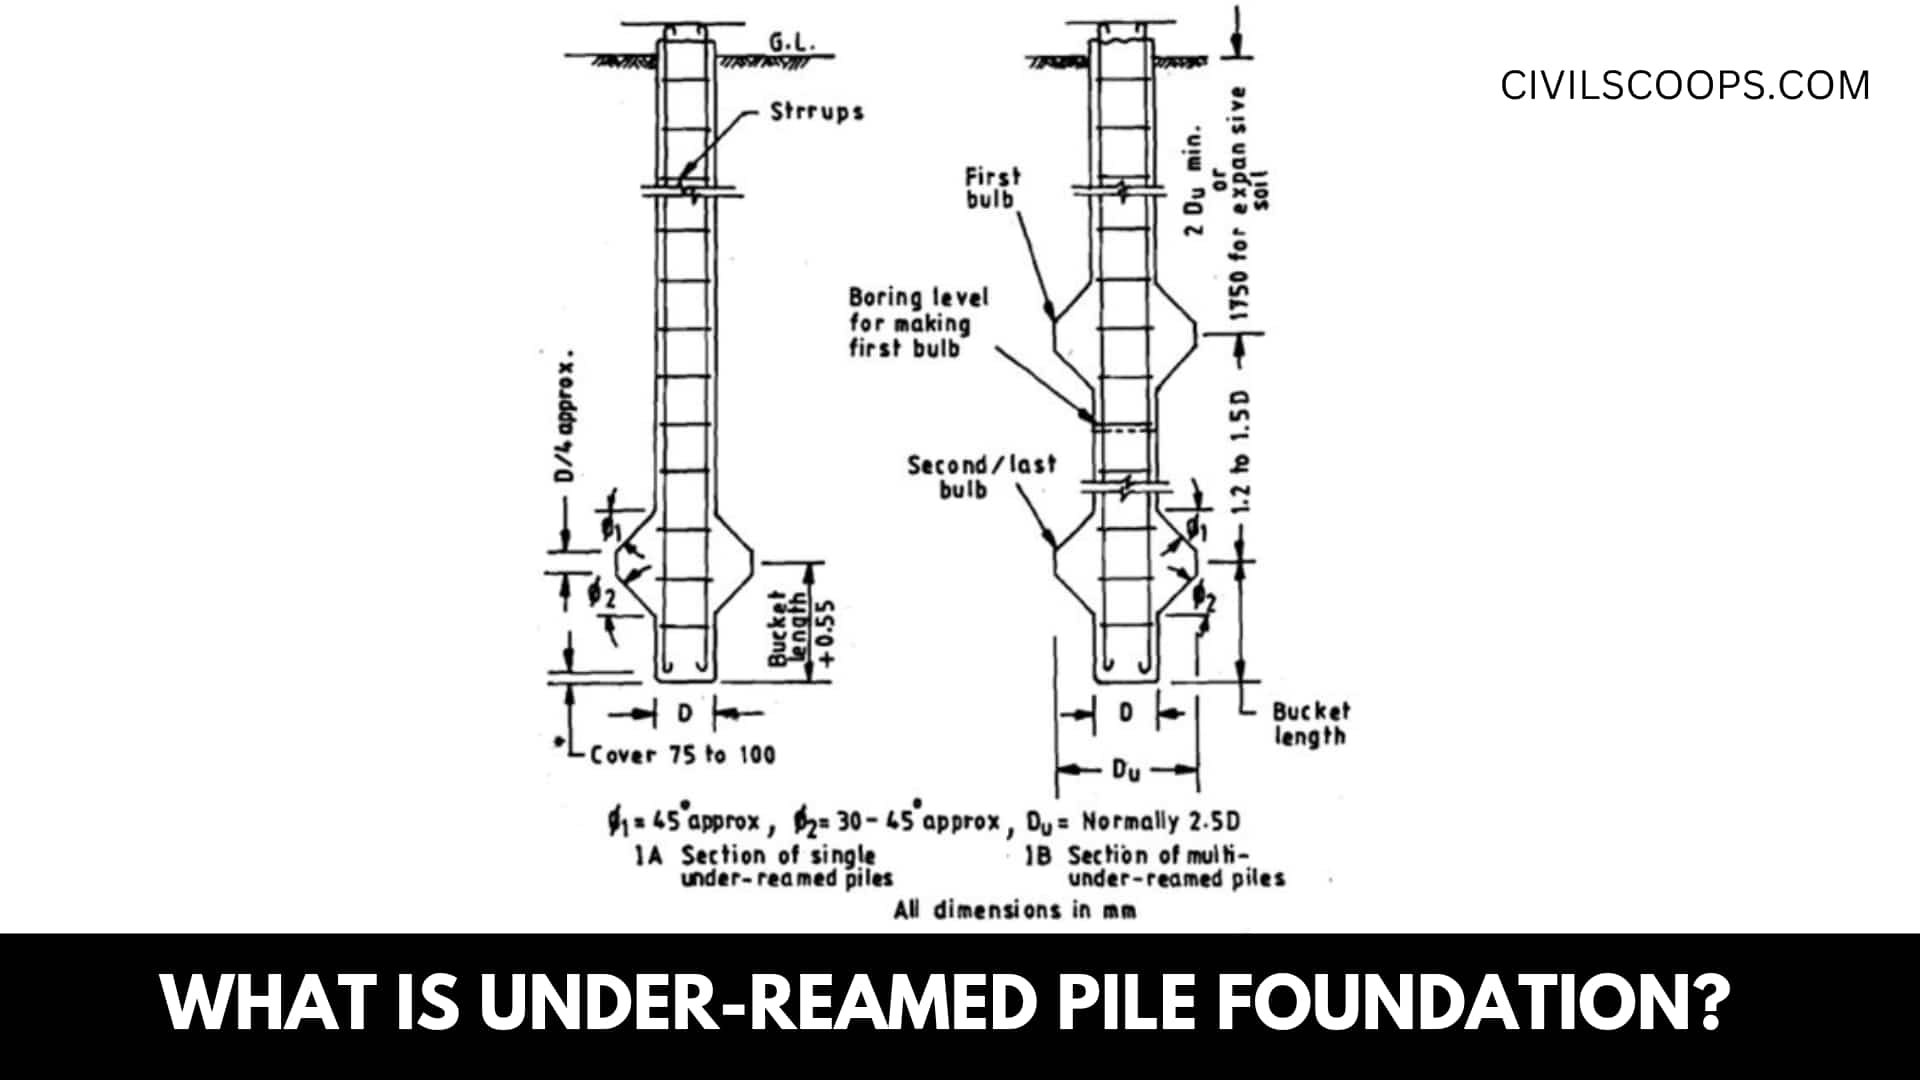 What Is Under-Reamed Pile Foundation?